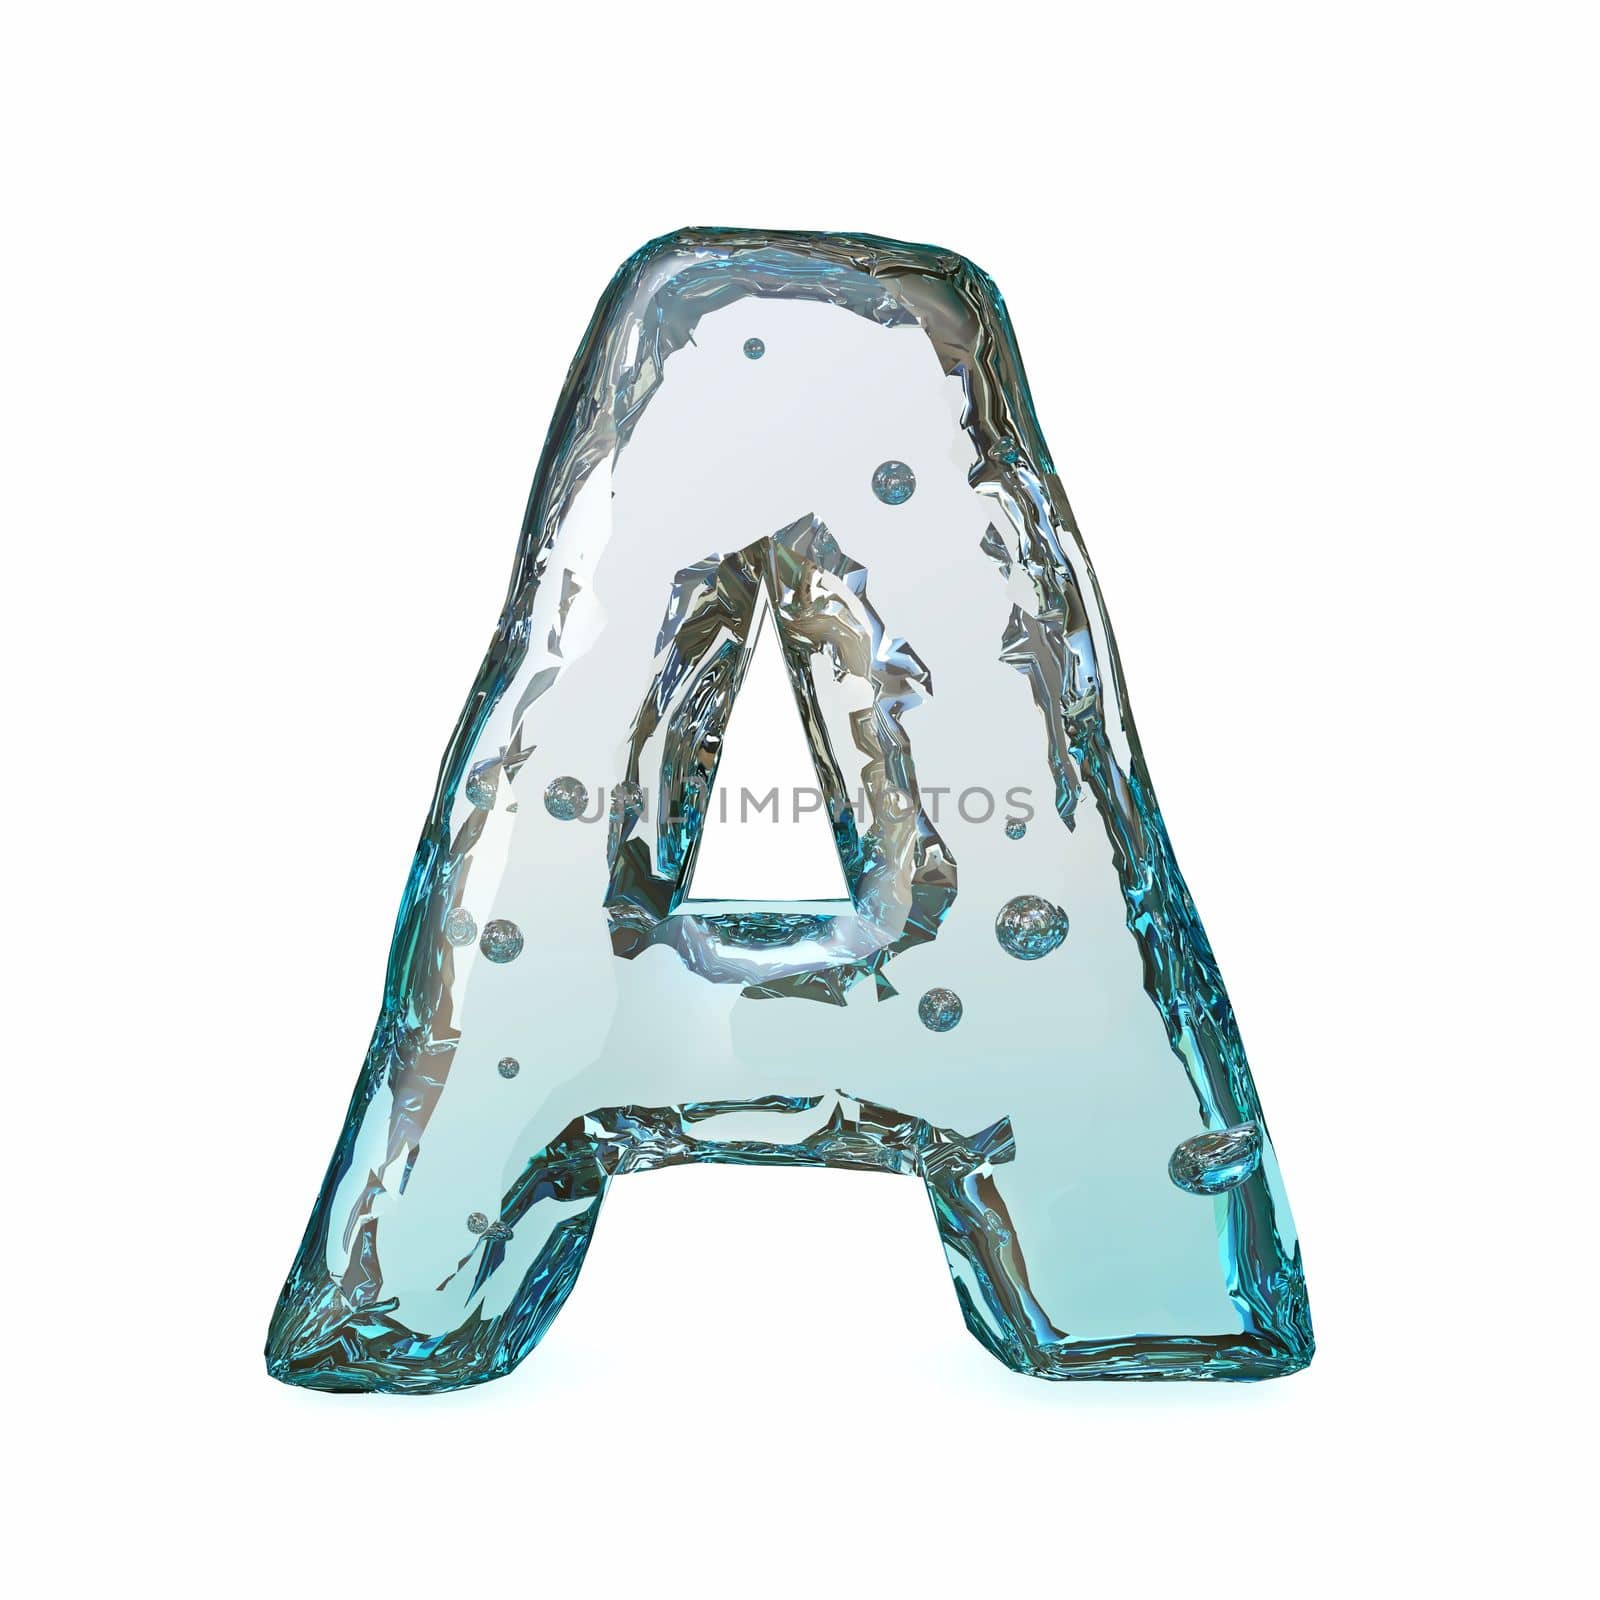 Blue ice font Letter A 3D rendering illustration isolated on white background